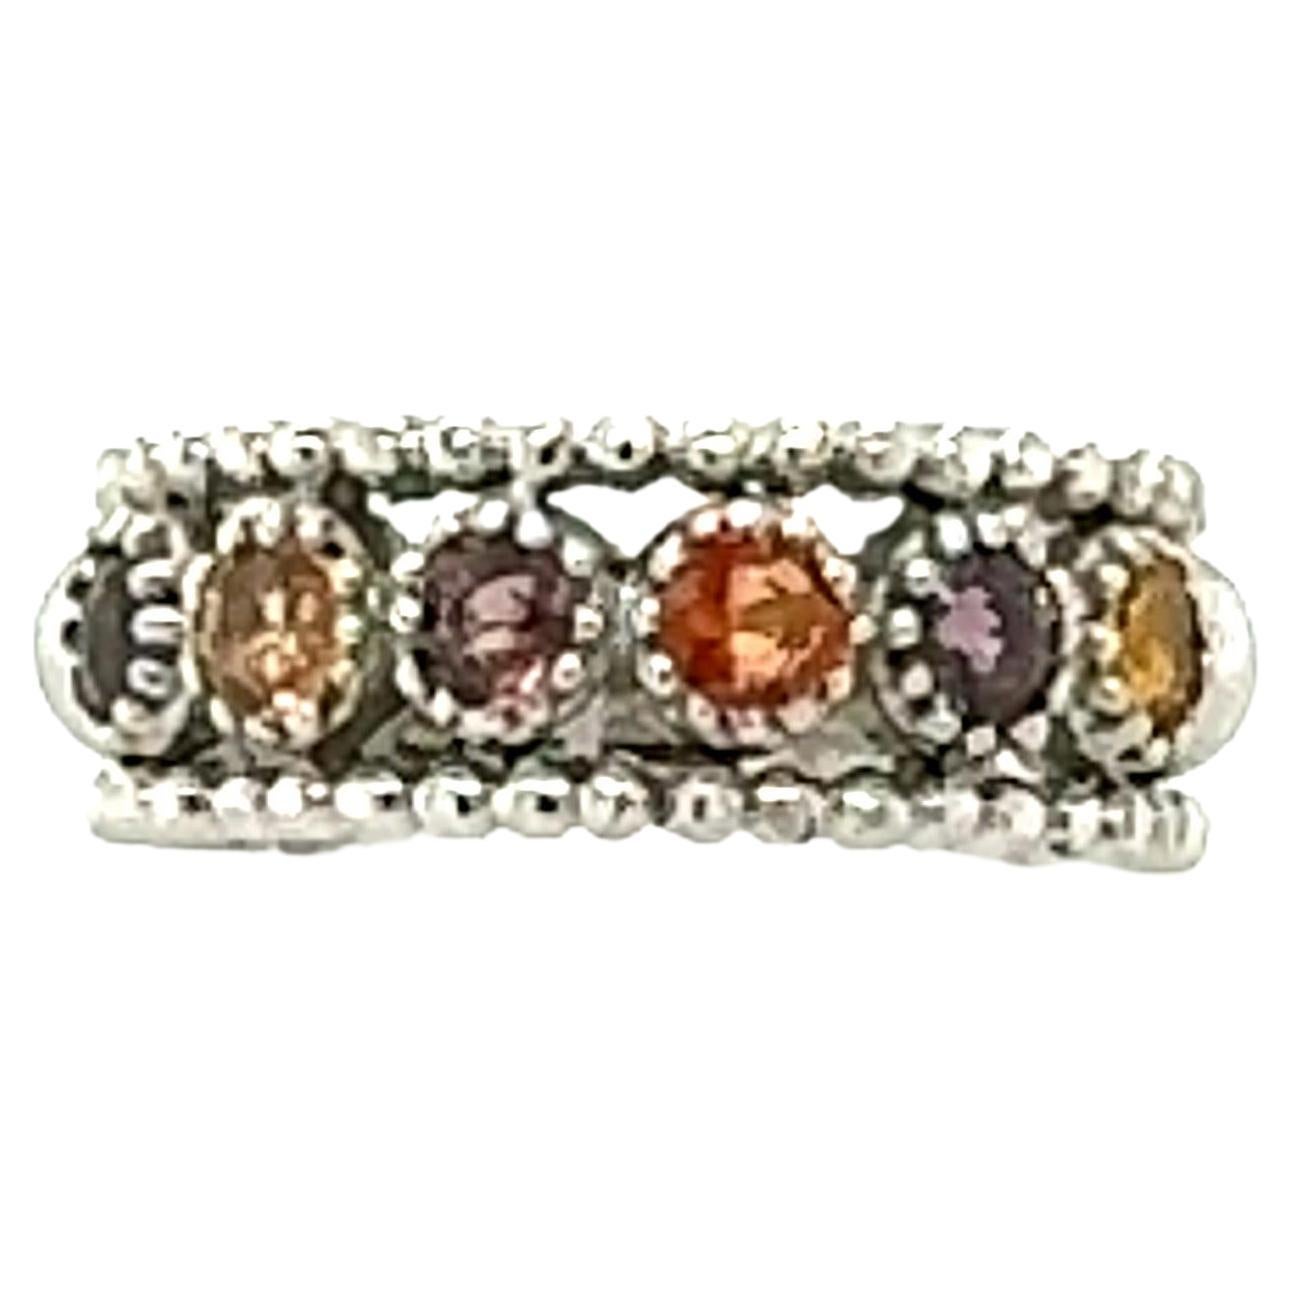 Simple sapphire band in 14K White Gold		

There are 6 Round Cut Natural Multicolor Sapphires with hues of Orange and Yellow that weigh a total of 1.06 carats.  The band looks great stacked with other bands too (*see photos*)
The band is curated in